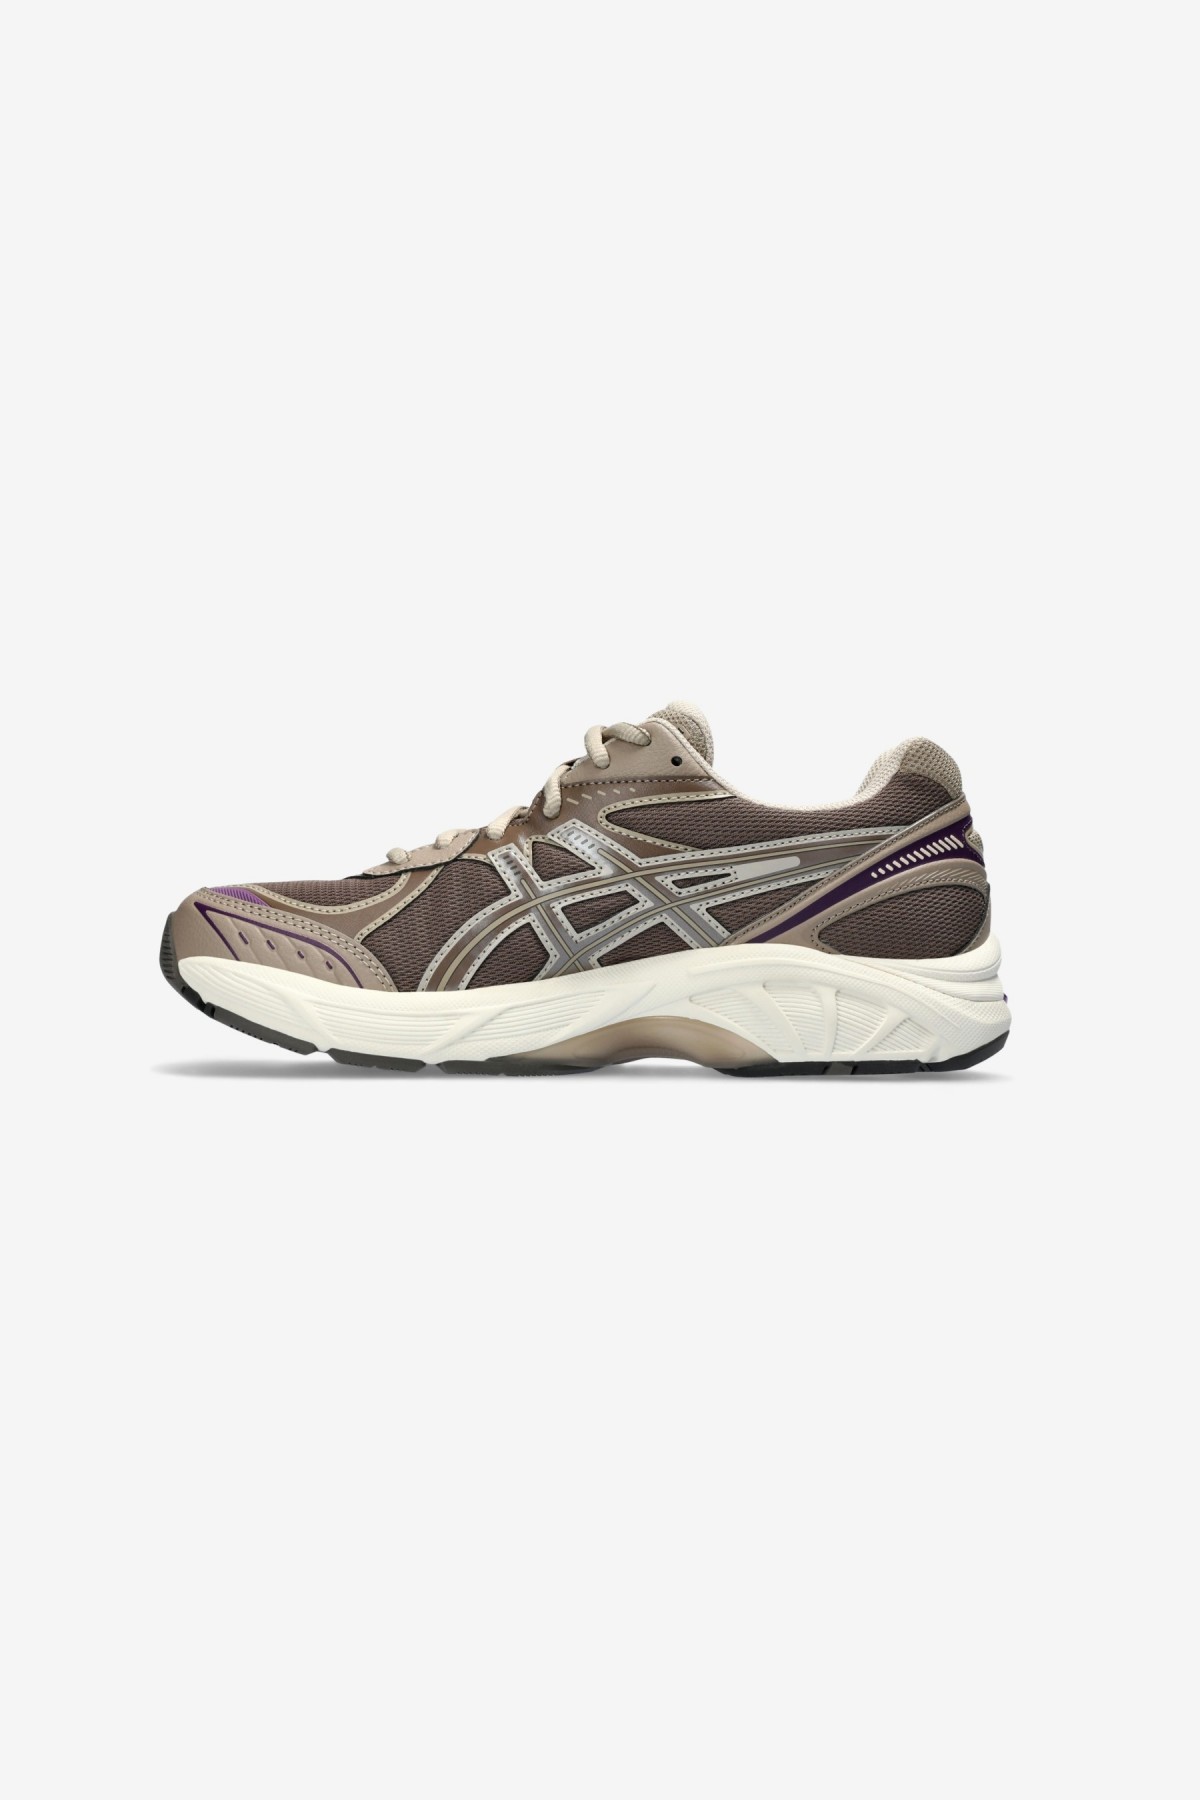 Asics GT-2160 in Dark Taupe/Taupe Grey